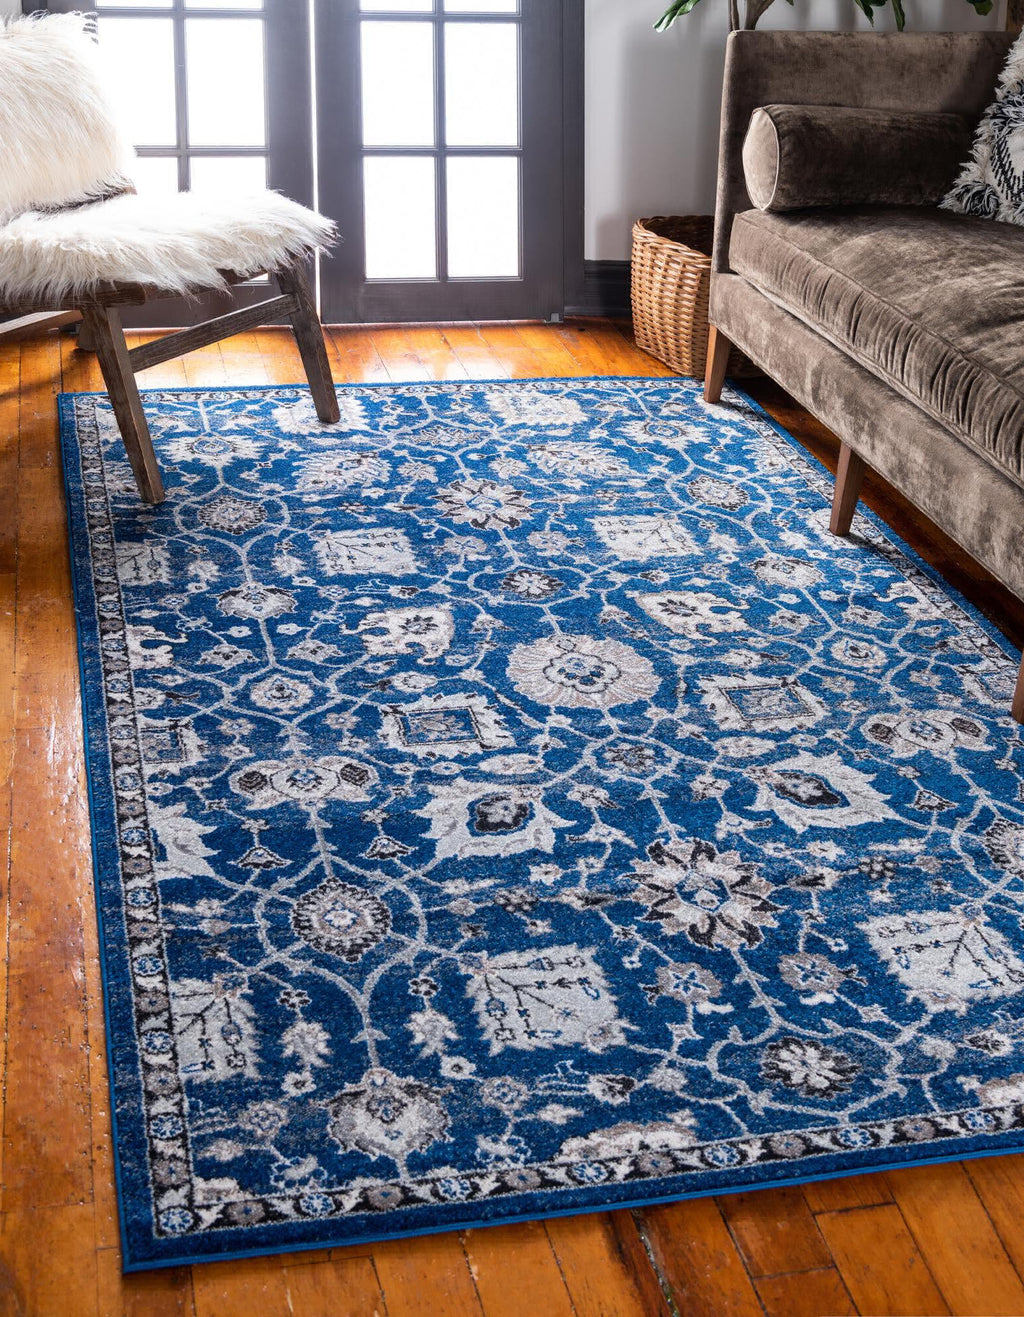 Unique Loom Tradition T-Heritage-5205a Blue Area Rug Rectangle Lifestyle Image Feature